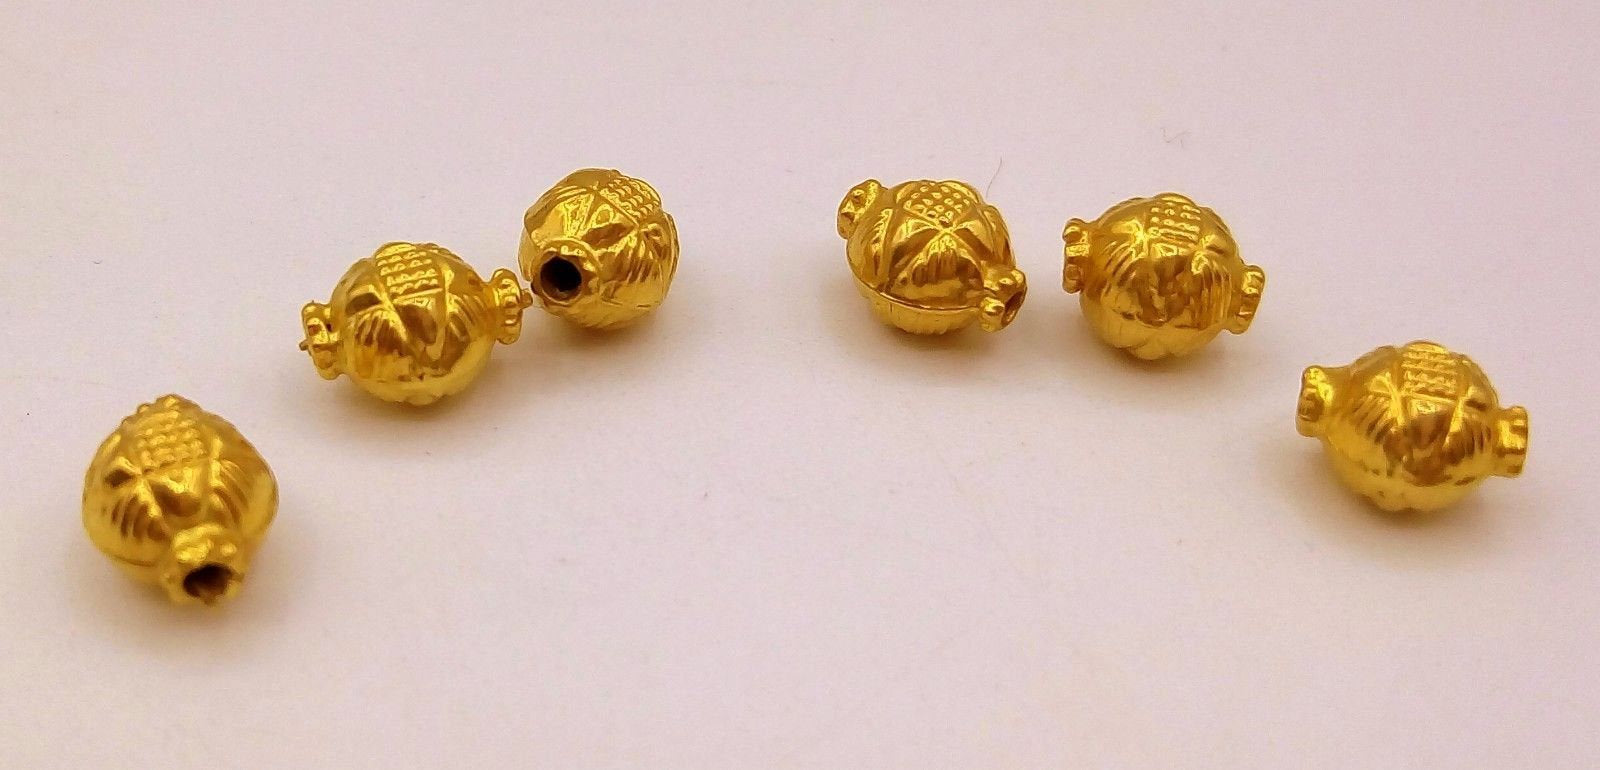 Vintage antique design handmade gorgeous lot 6 pieces 22kt yellow gold beads jewelry findings use to custom jewelry making ideas from india - TRIBAL ORNAMENTS